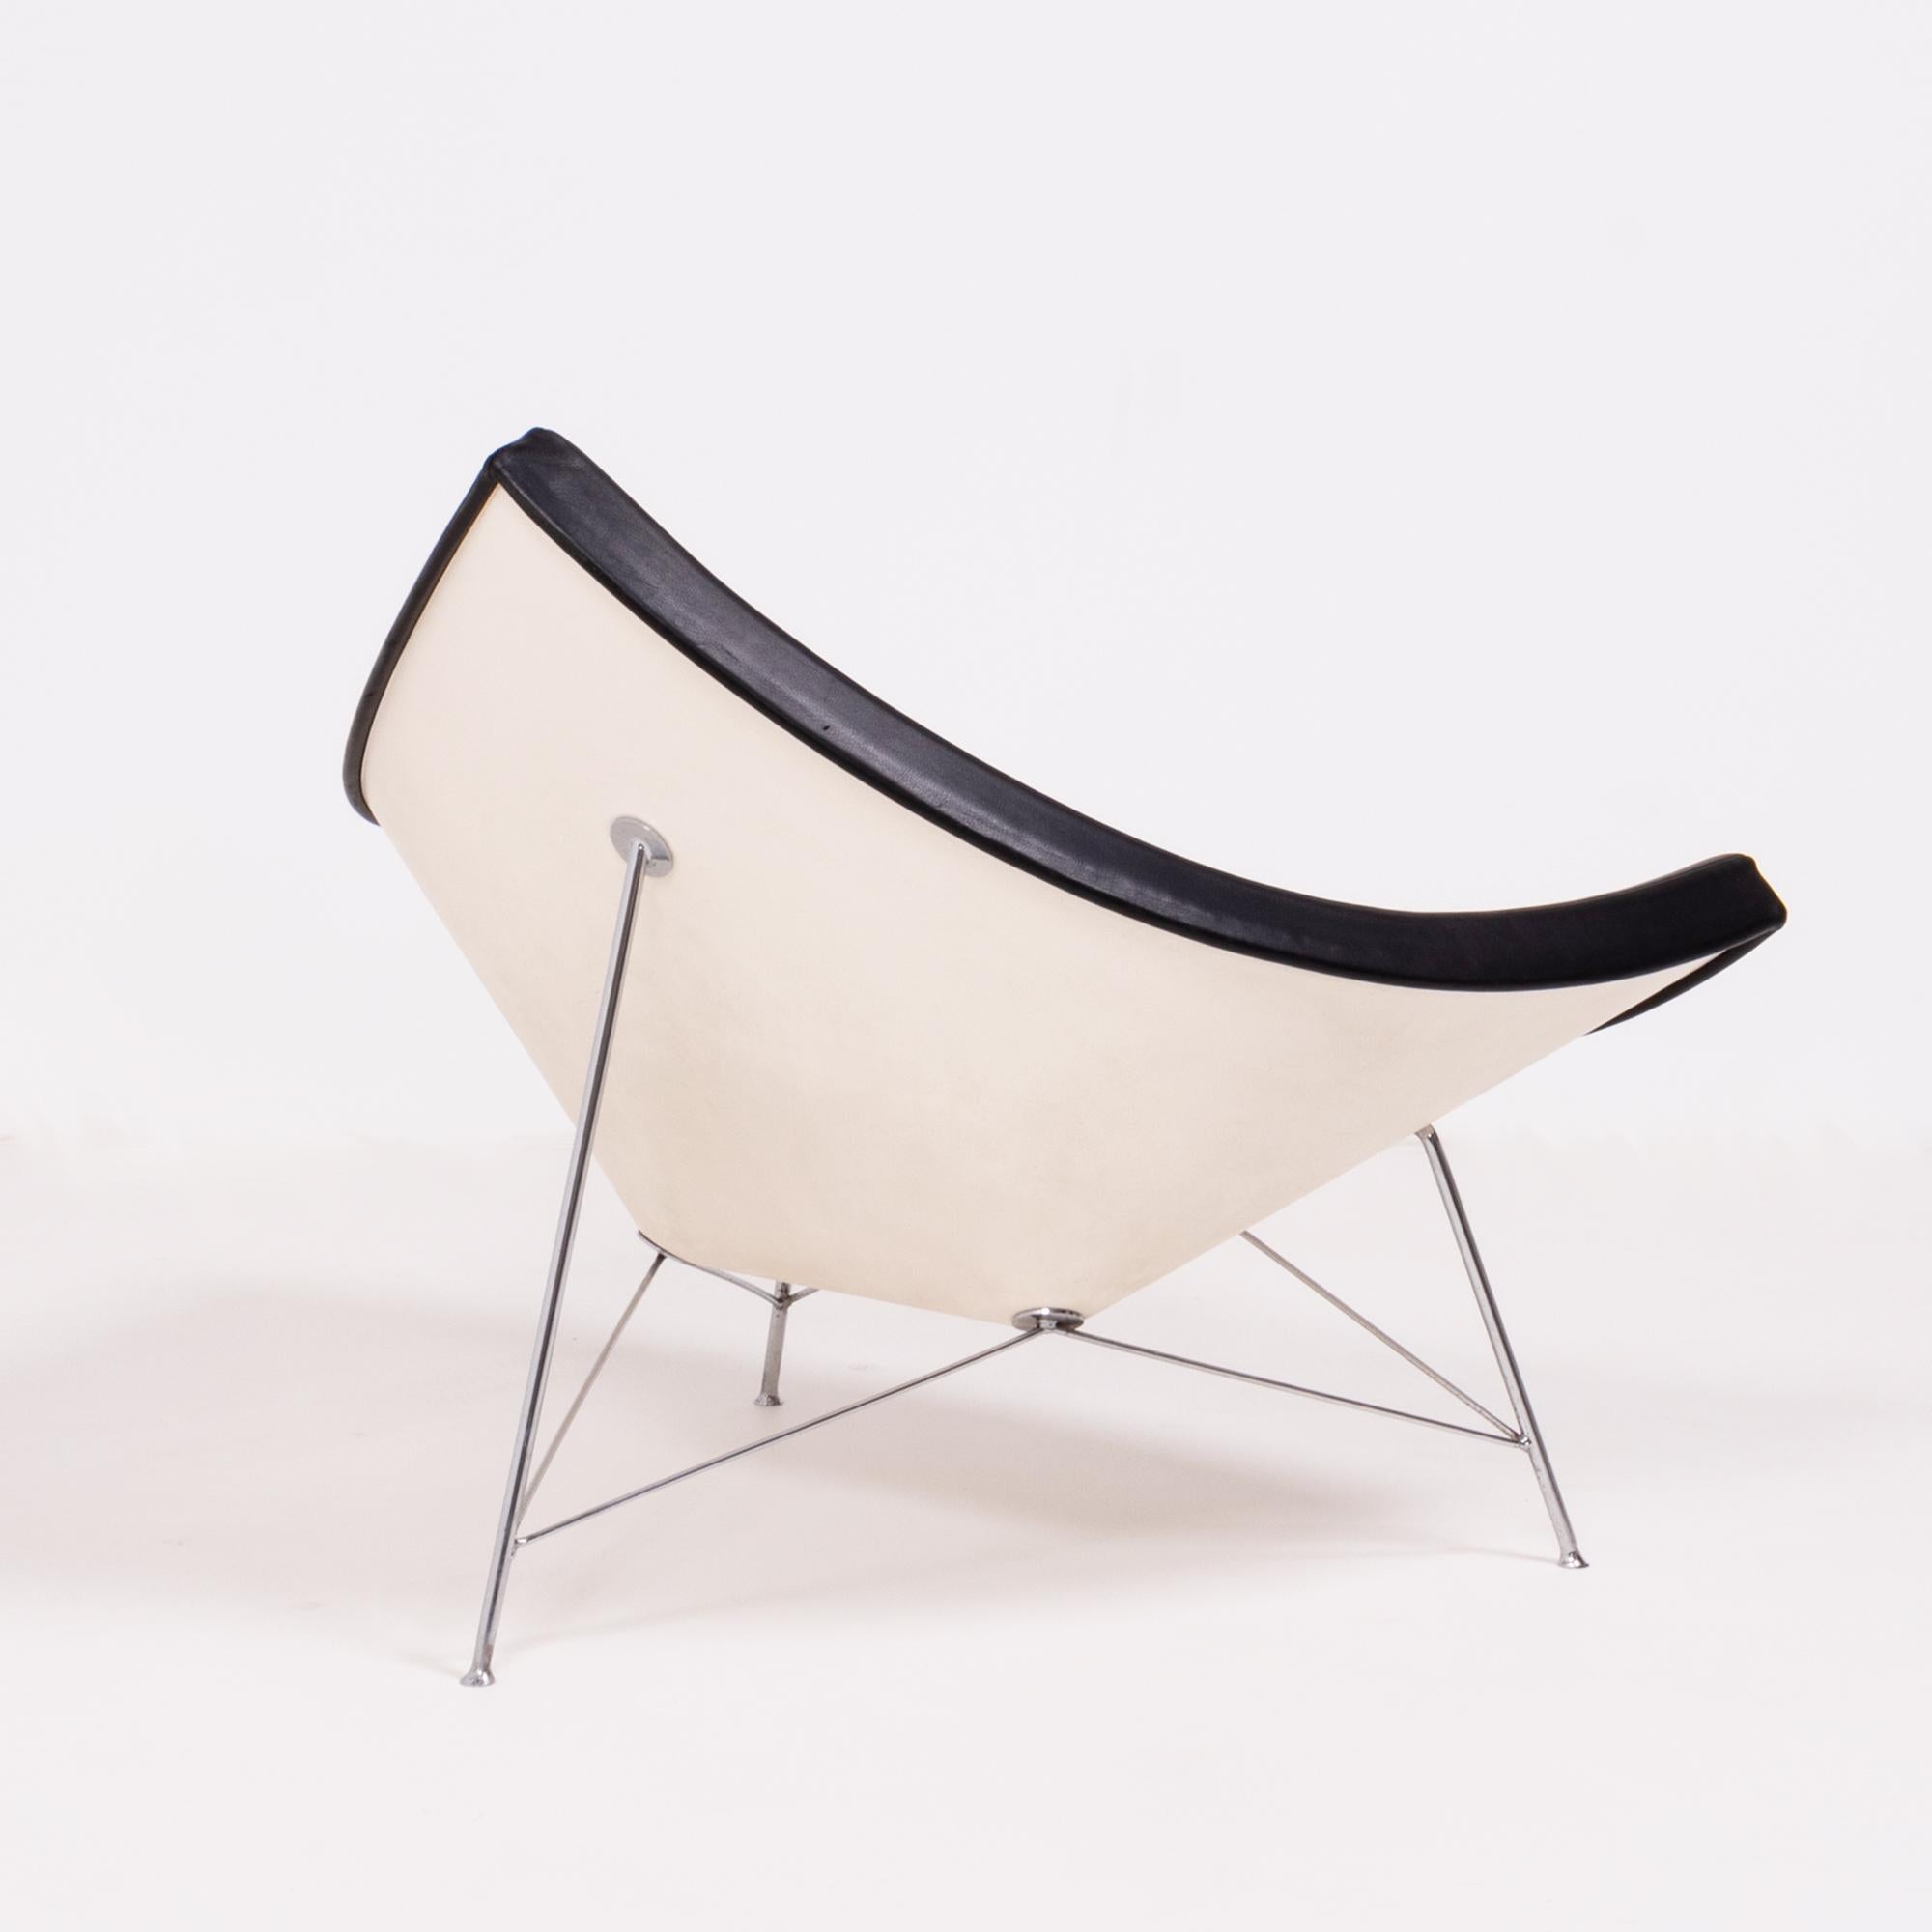 French Vitra Coconut Chair by George Nelson in Black Leather, 2003